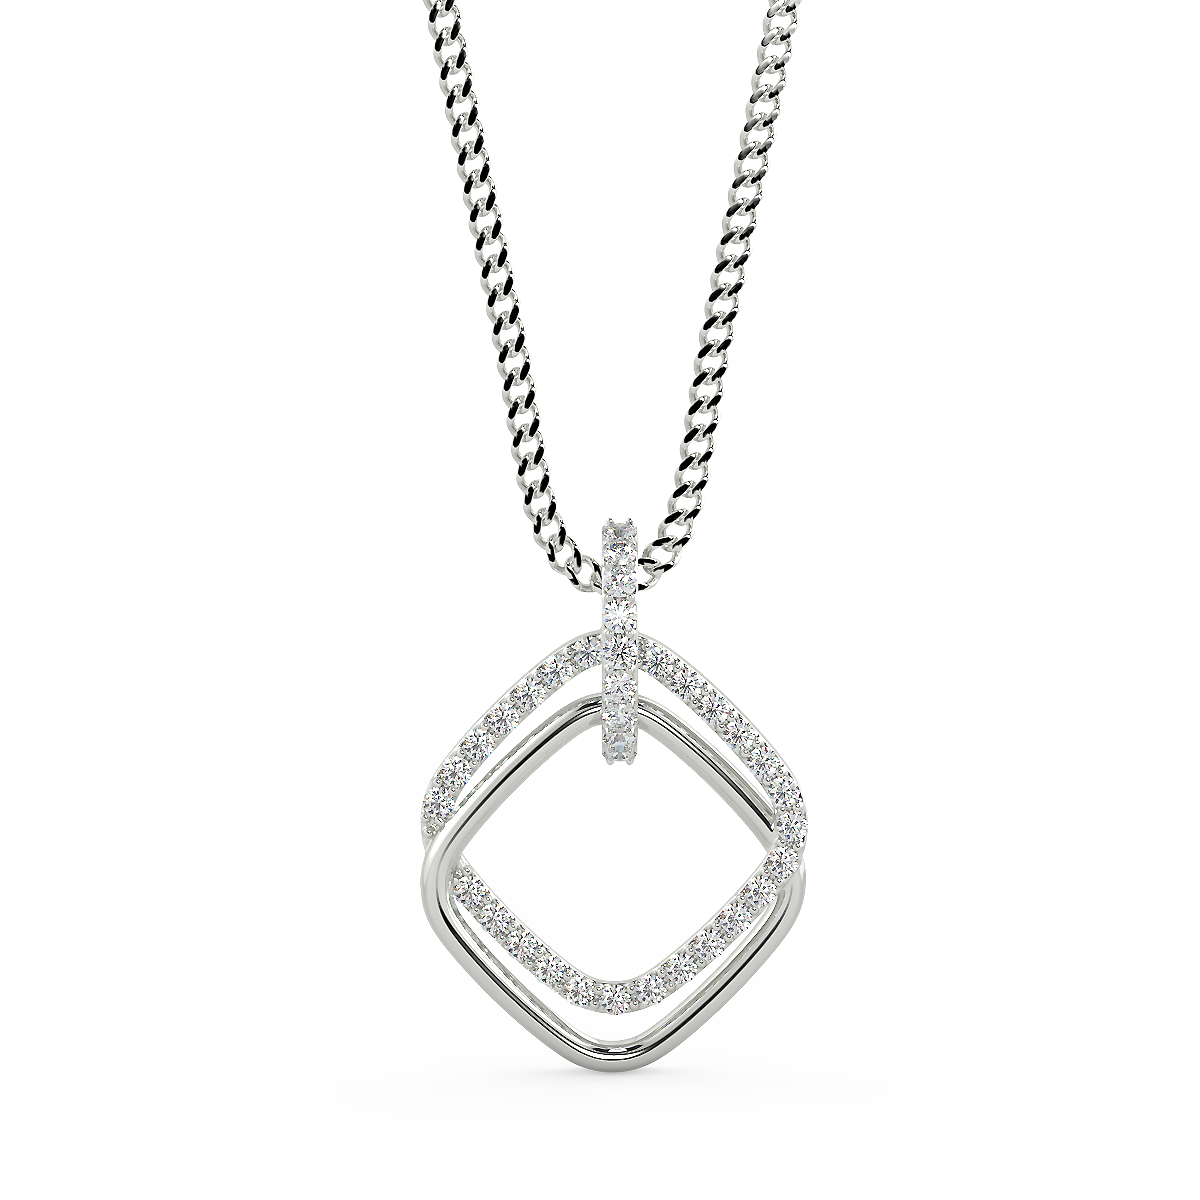 The Lily Pendant (925 Sterling Silver)